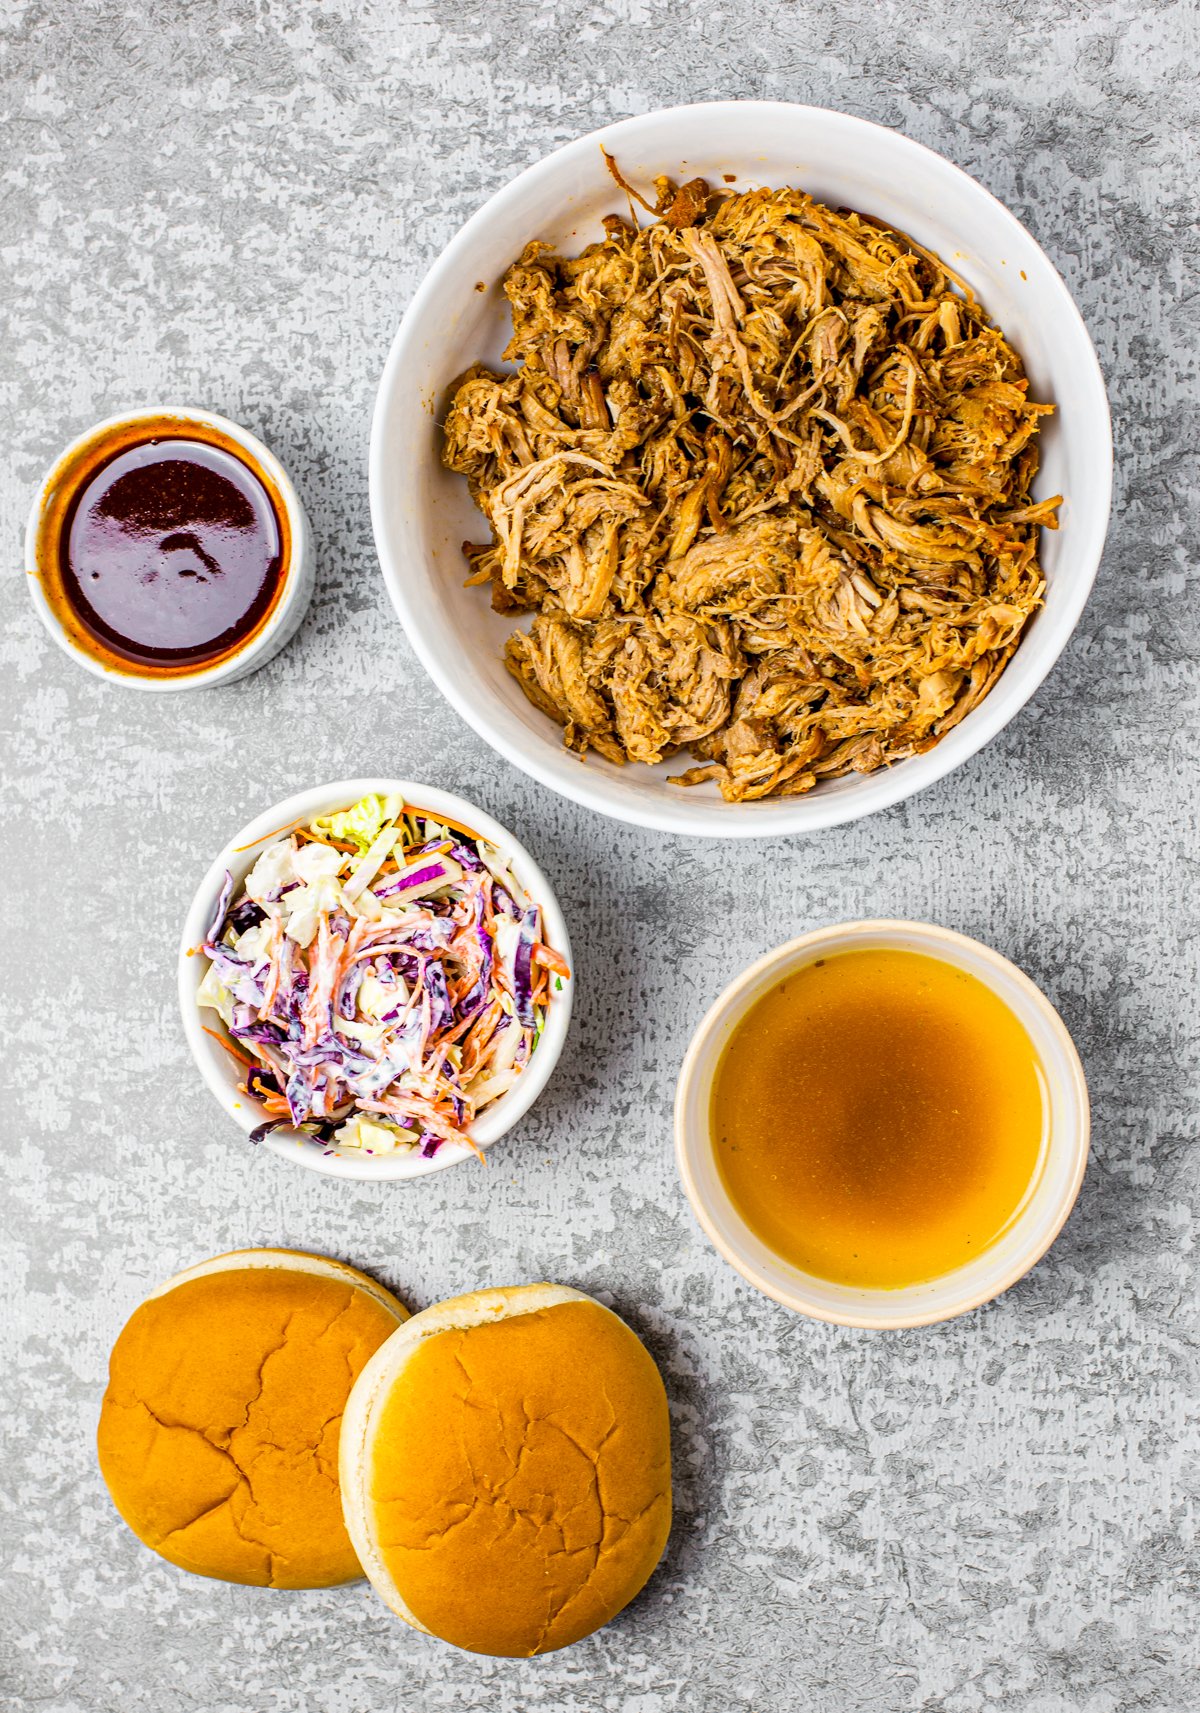 Ingredients needed to make Crock Pot Pulled Pork Sandwiches